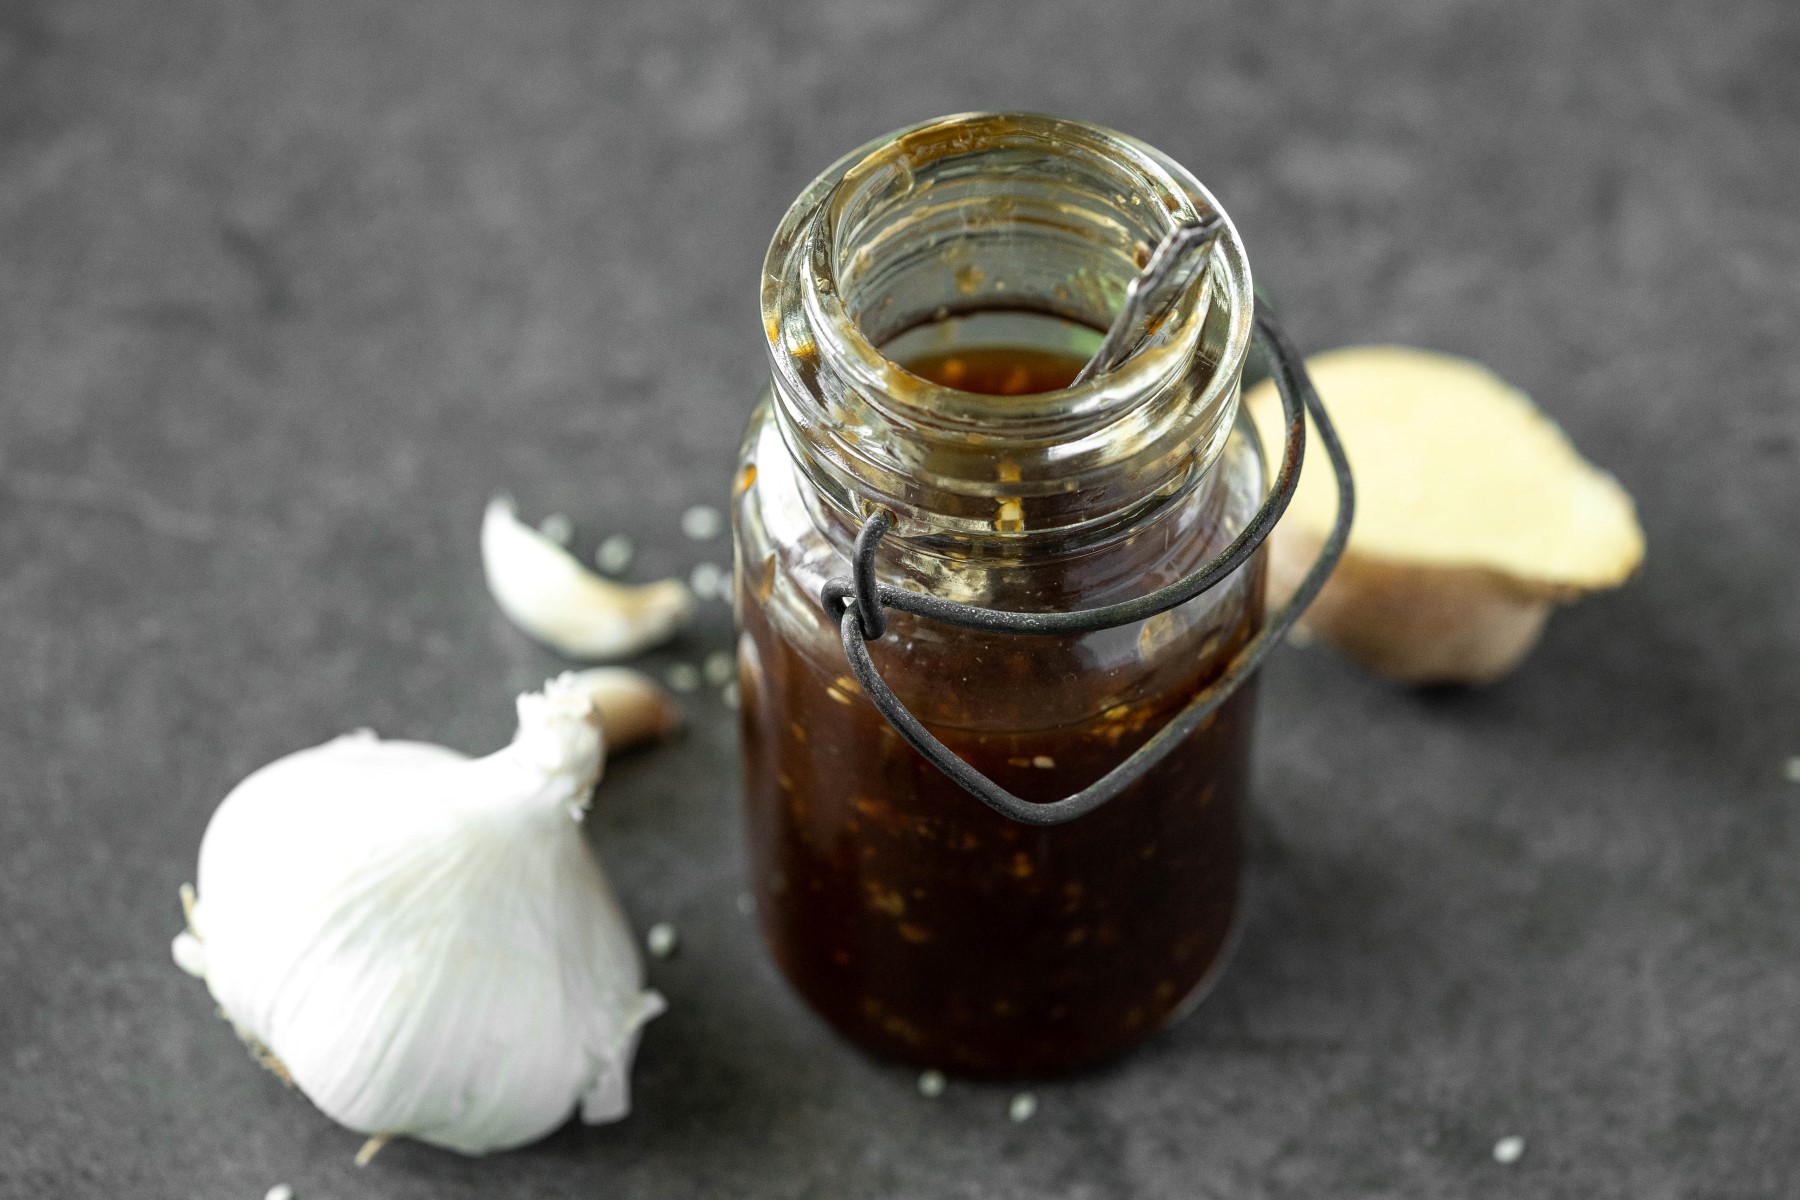 Glass jar filled with teriyaki sauce with a clove of garlic and a piece of ginger beside the jar.